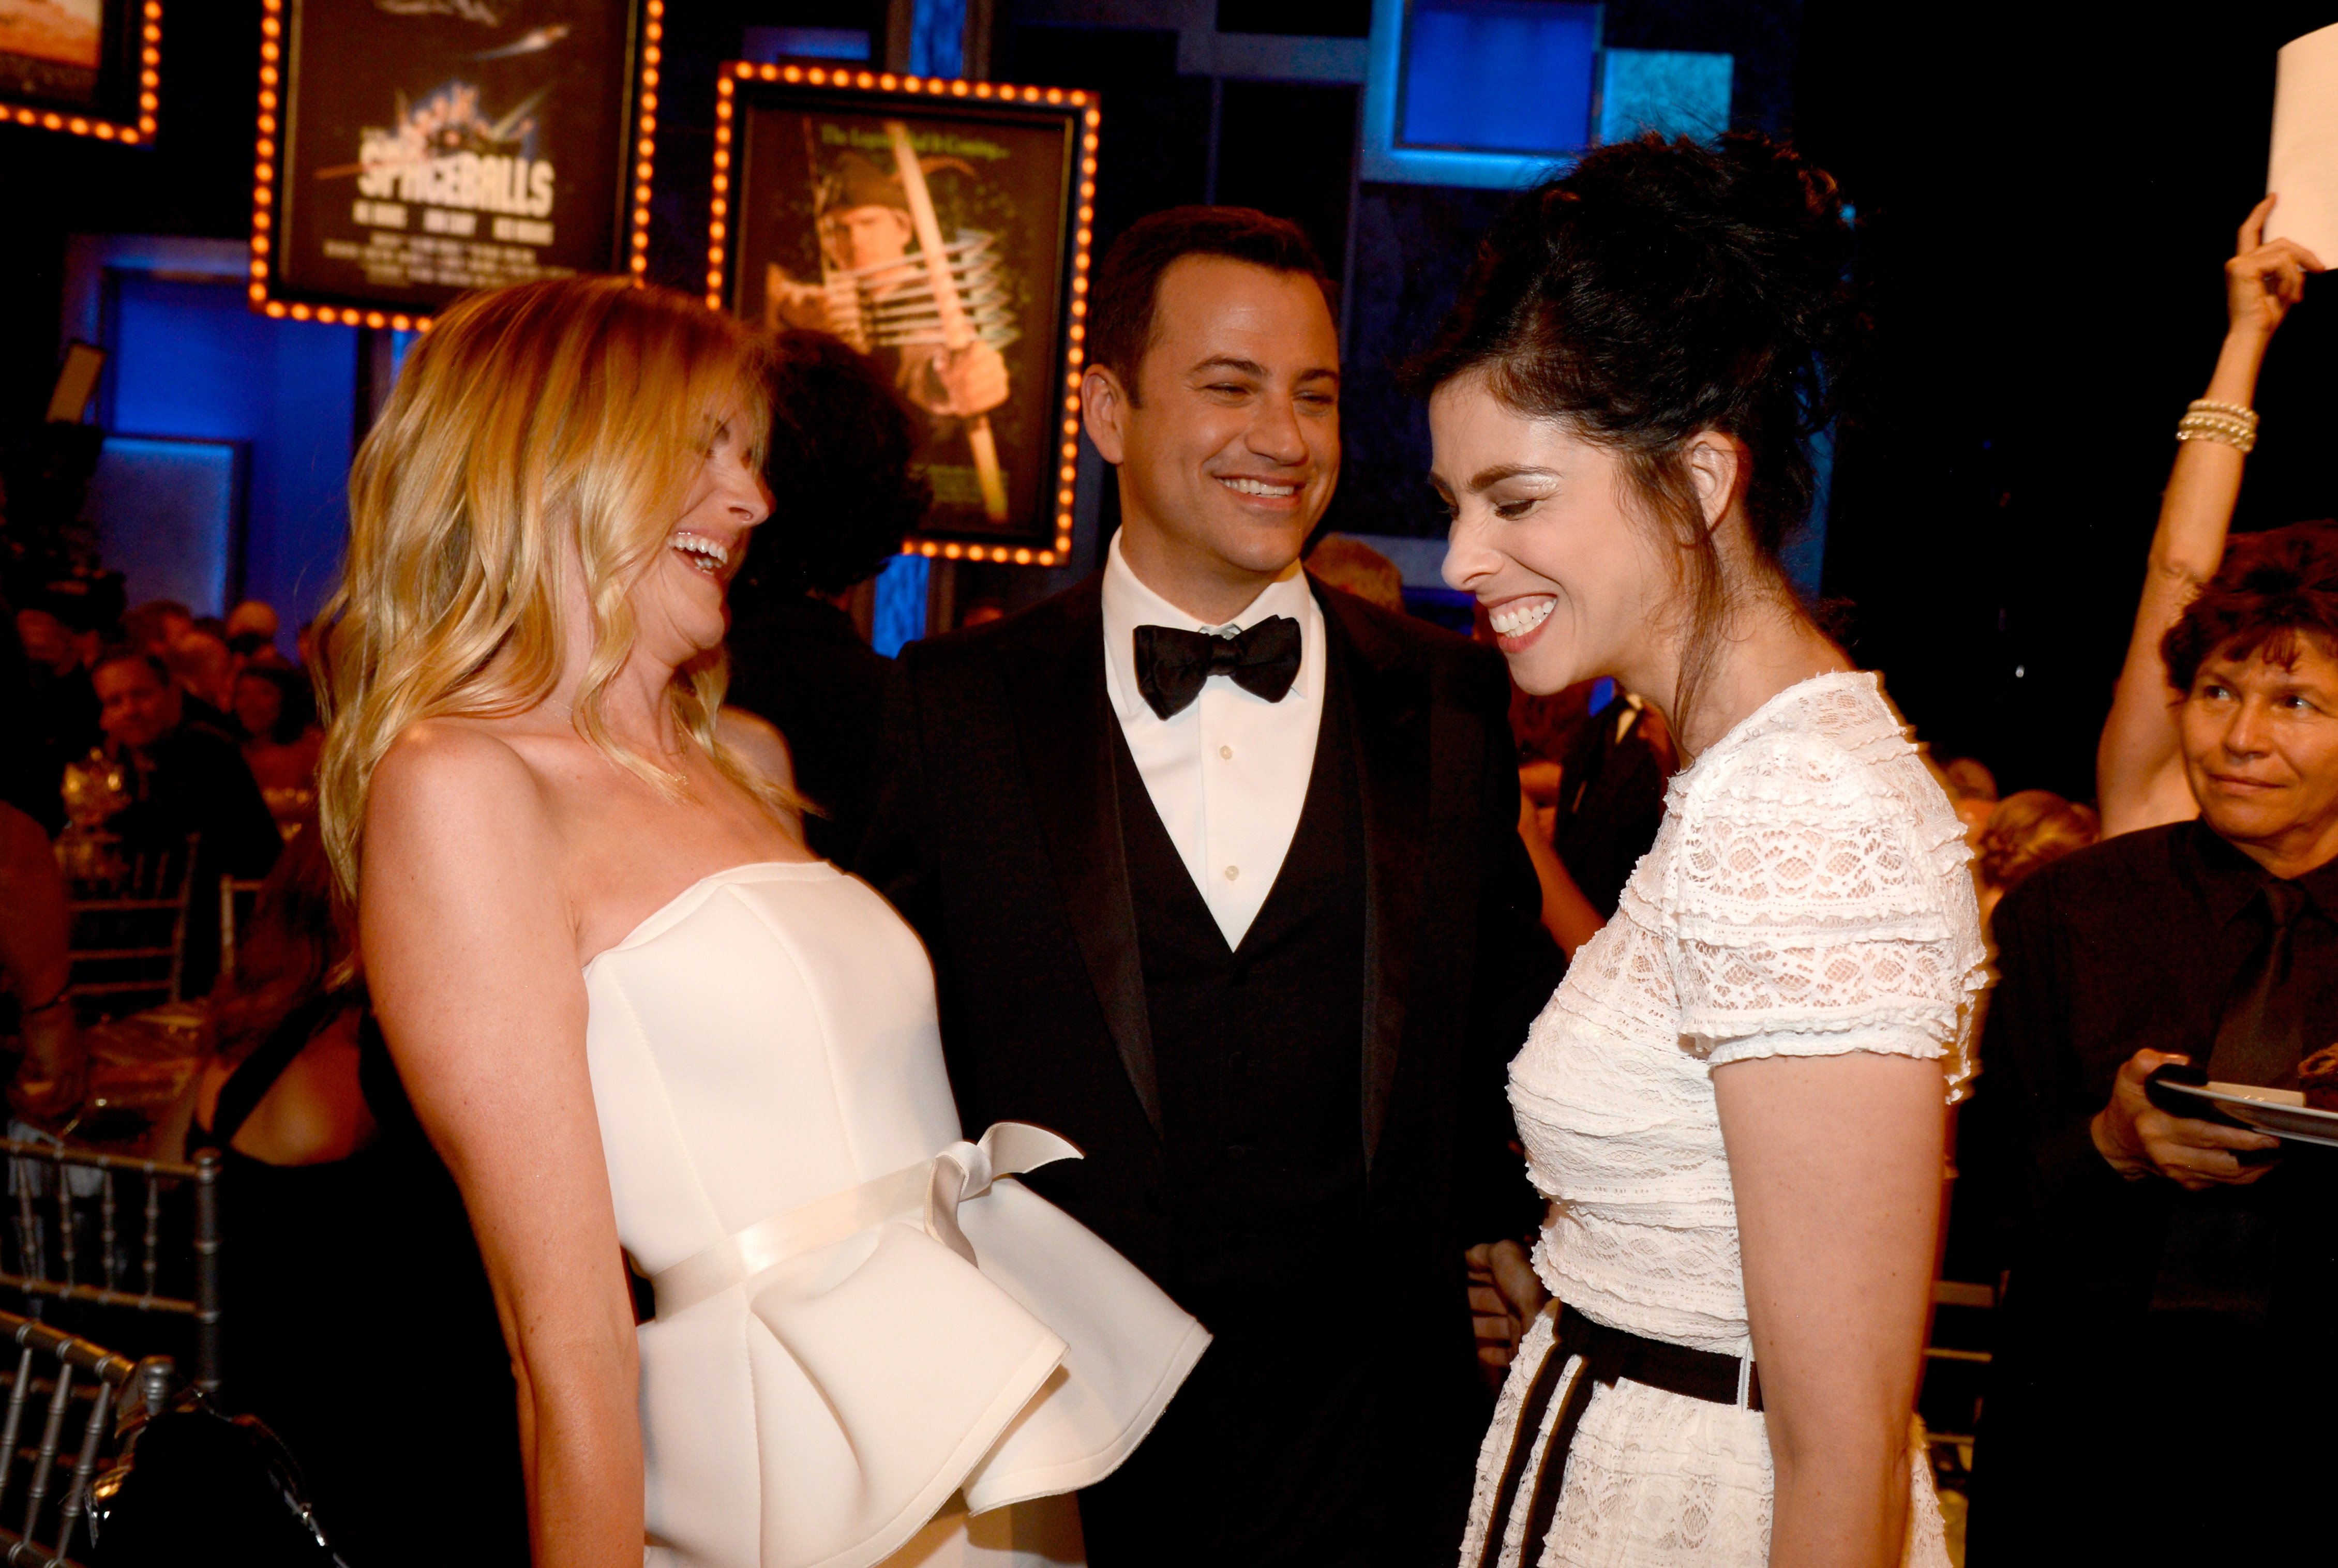 Molly McNearney and her husband, Jimmy Kimmel, laugh together with Sarah Silverman at the AFI's 41st Life Achievement Award Tribute to Mel Brooks on June 6, 2013, in Hollywood, California. | Source: Getty Images